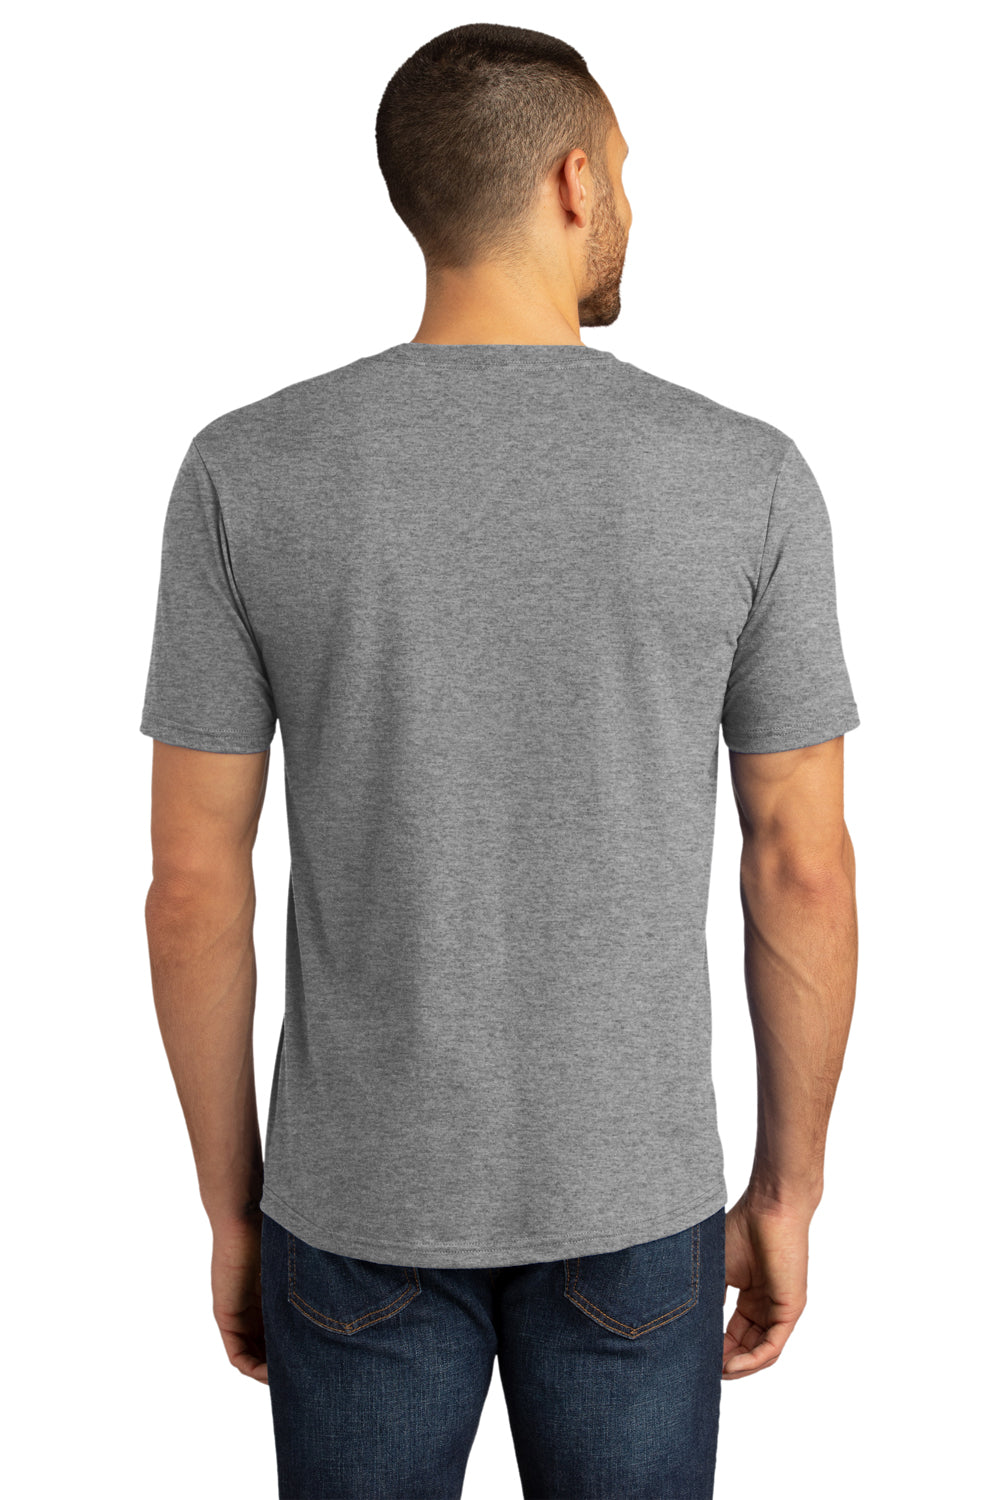 District Mens Perfect DTG Short Sleeve Crewneck T-Shirt Grey Frost Side